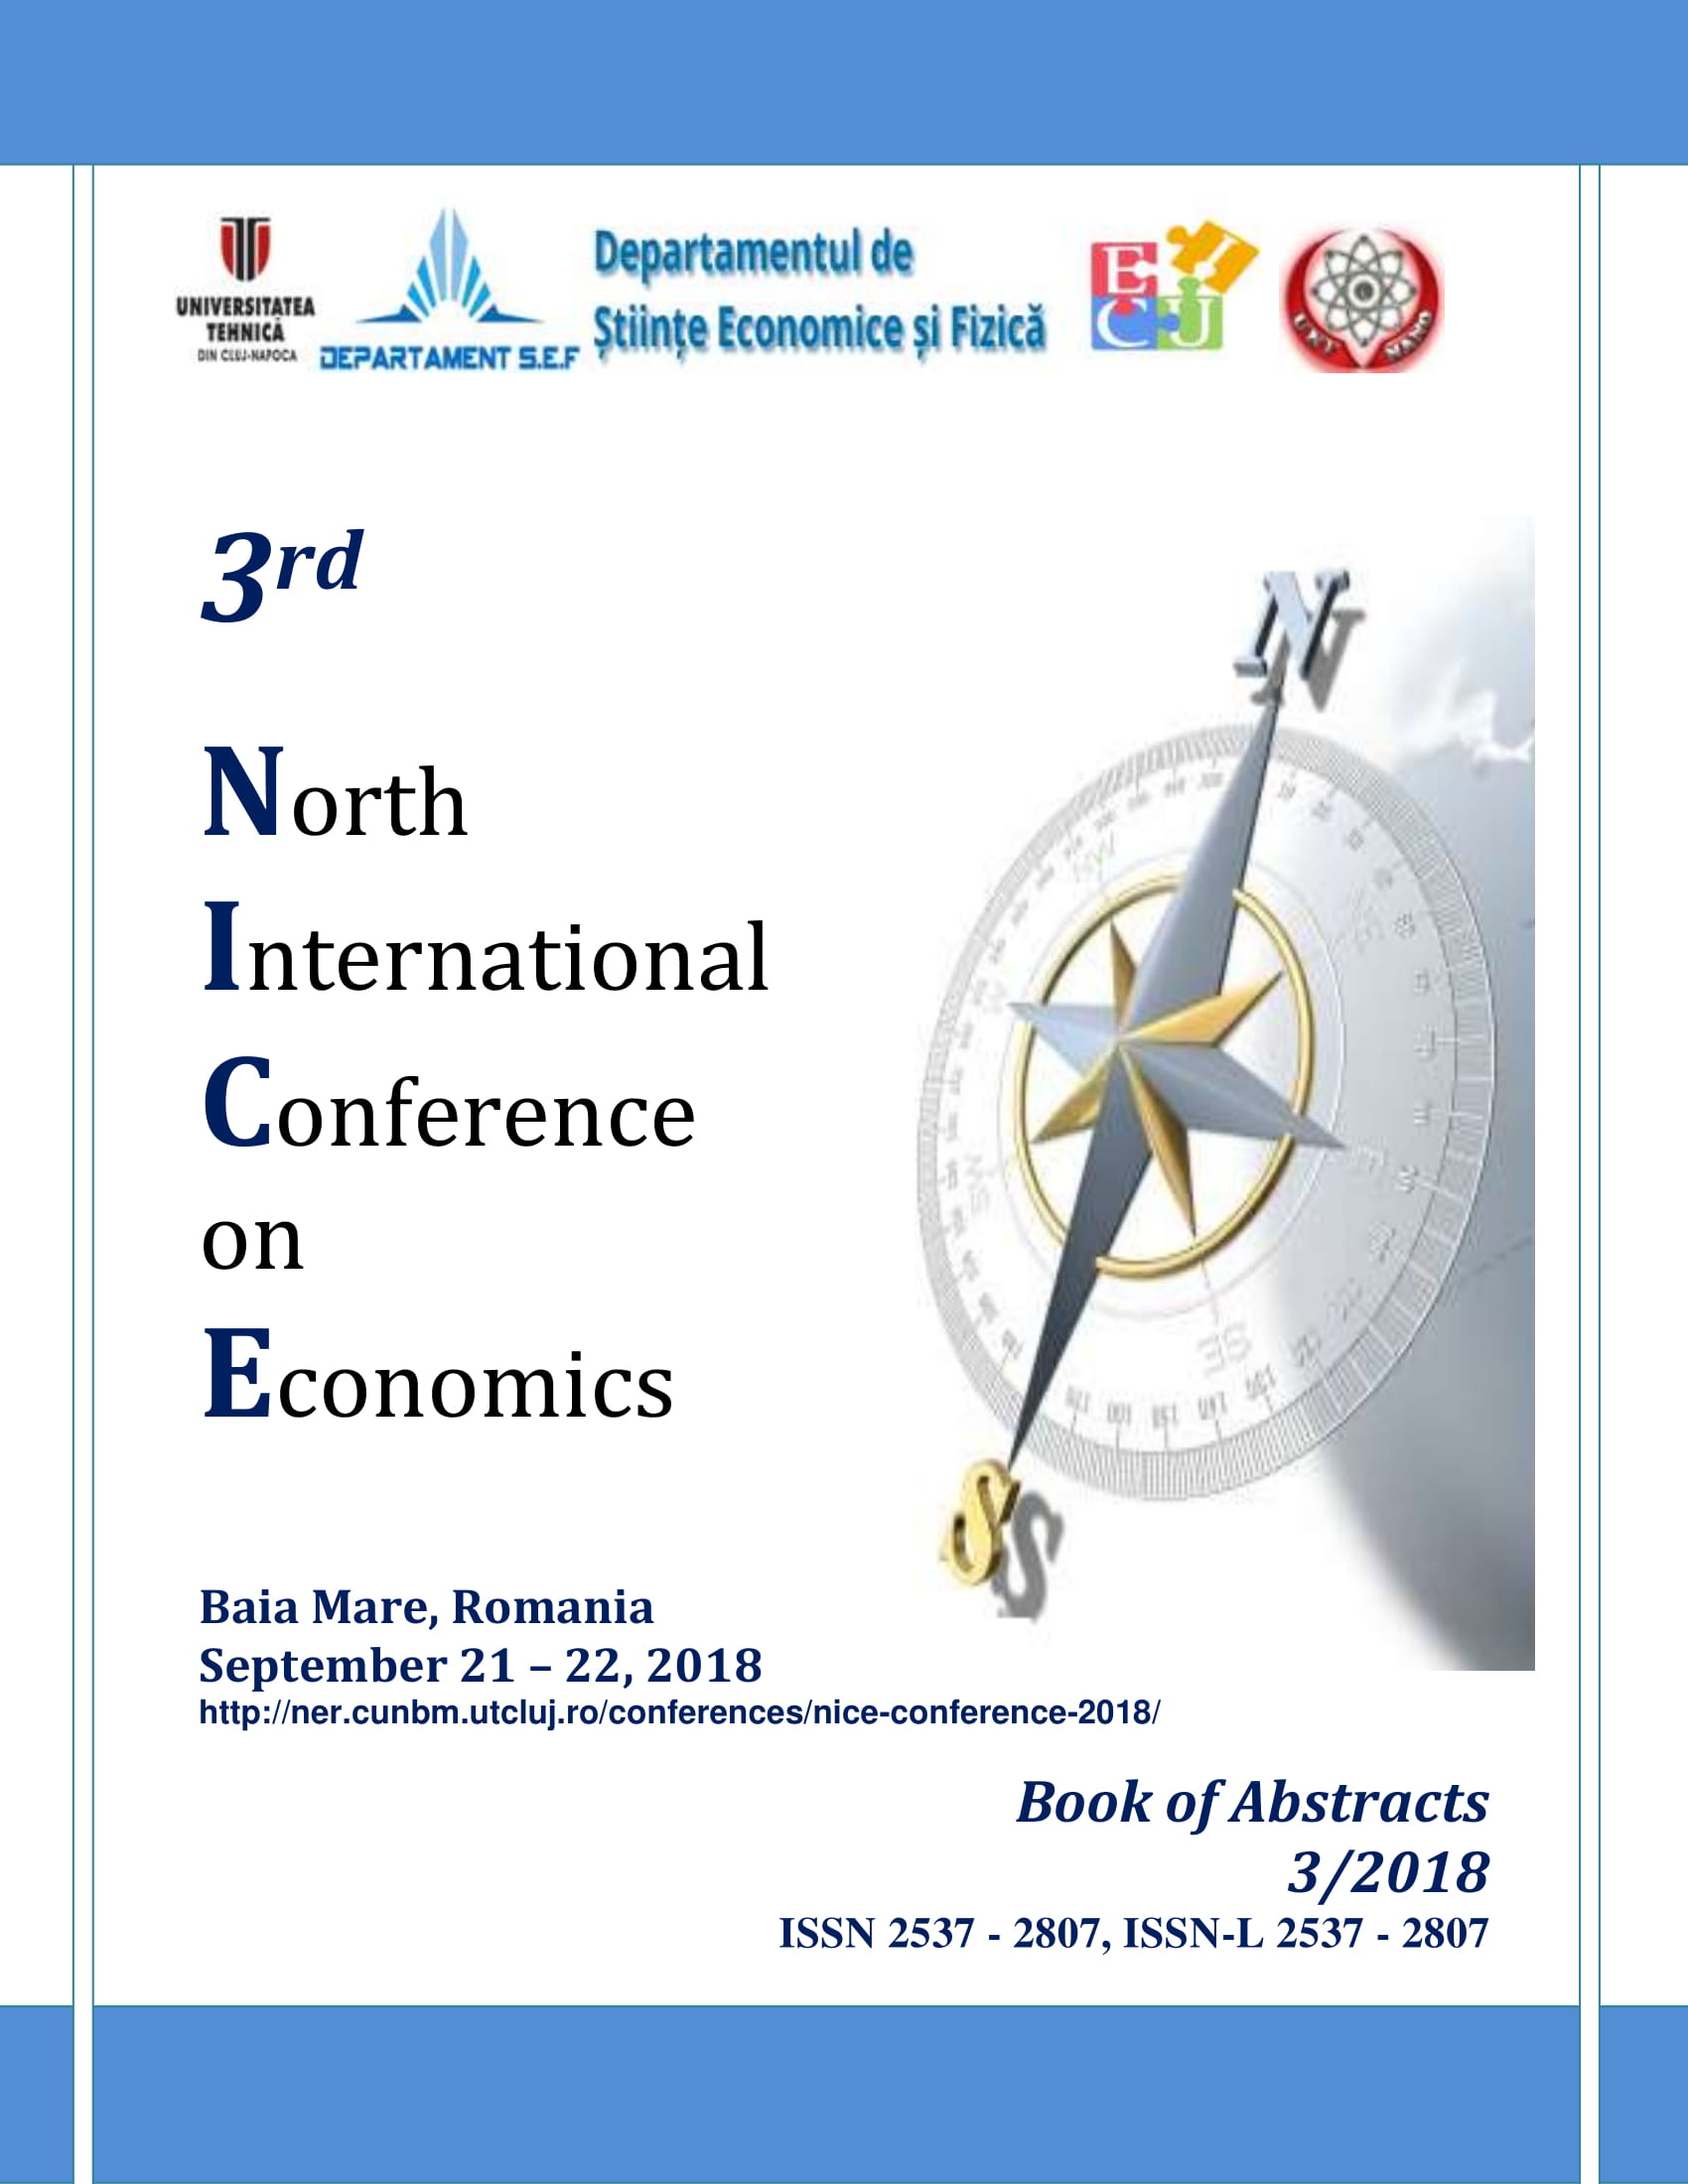 NICE Conference 2018 NORTH ECONOMIC REVIEW